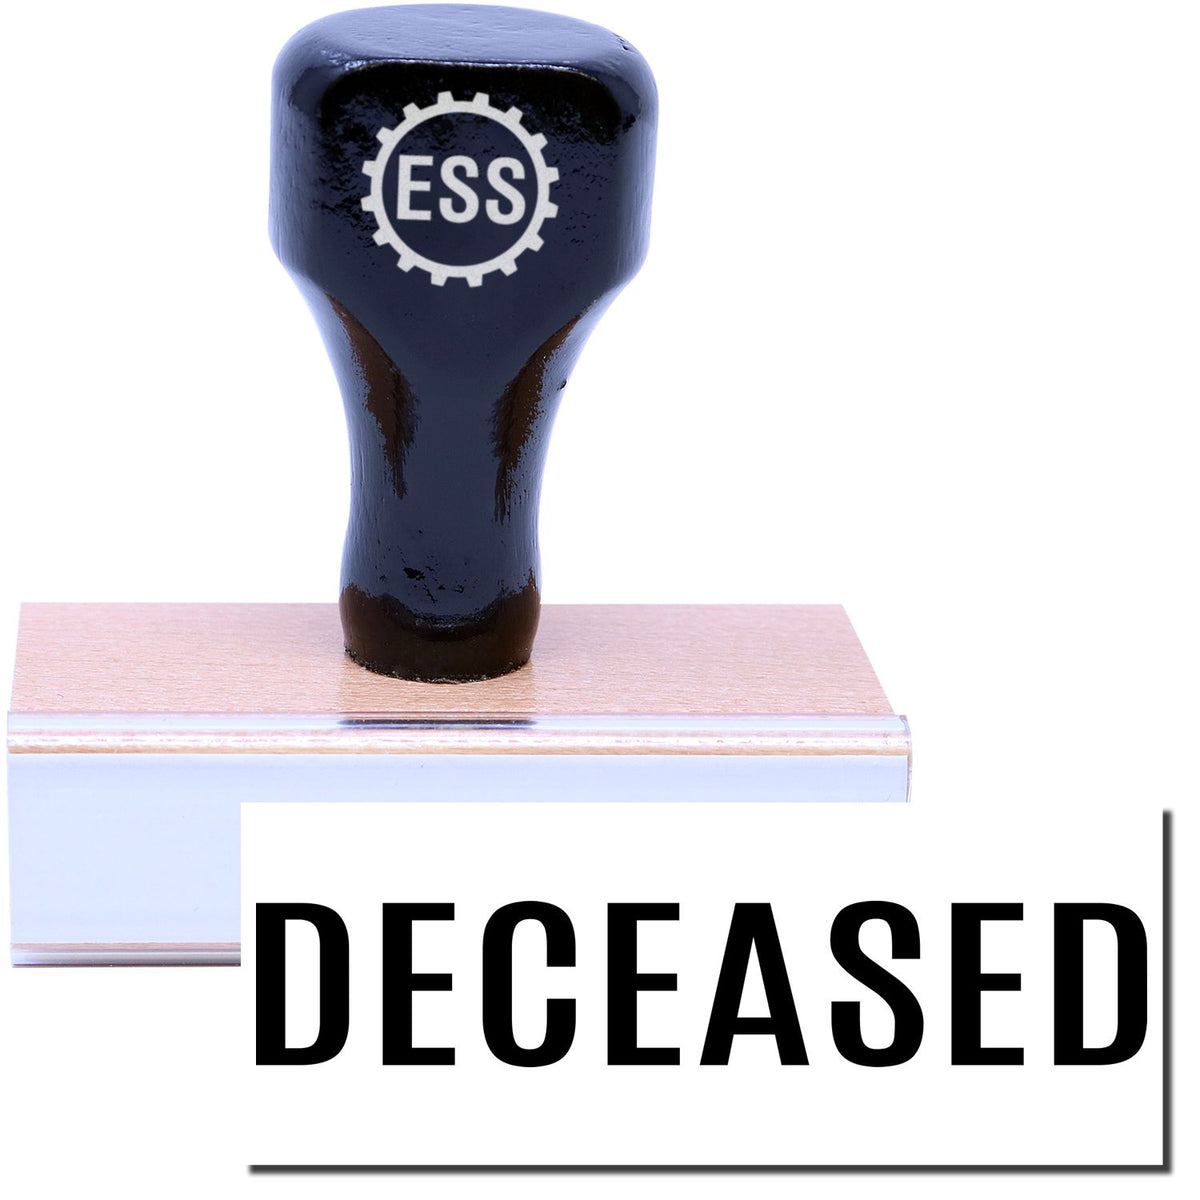 A stock office rubber stamp with a stamped image showing how the text &quot;DECEASED&quot; in a large bold font is displayed after stamping.